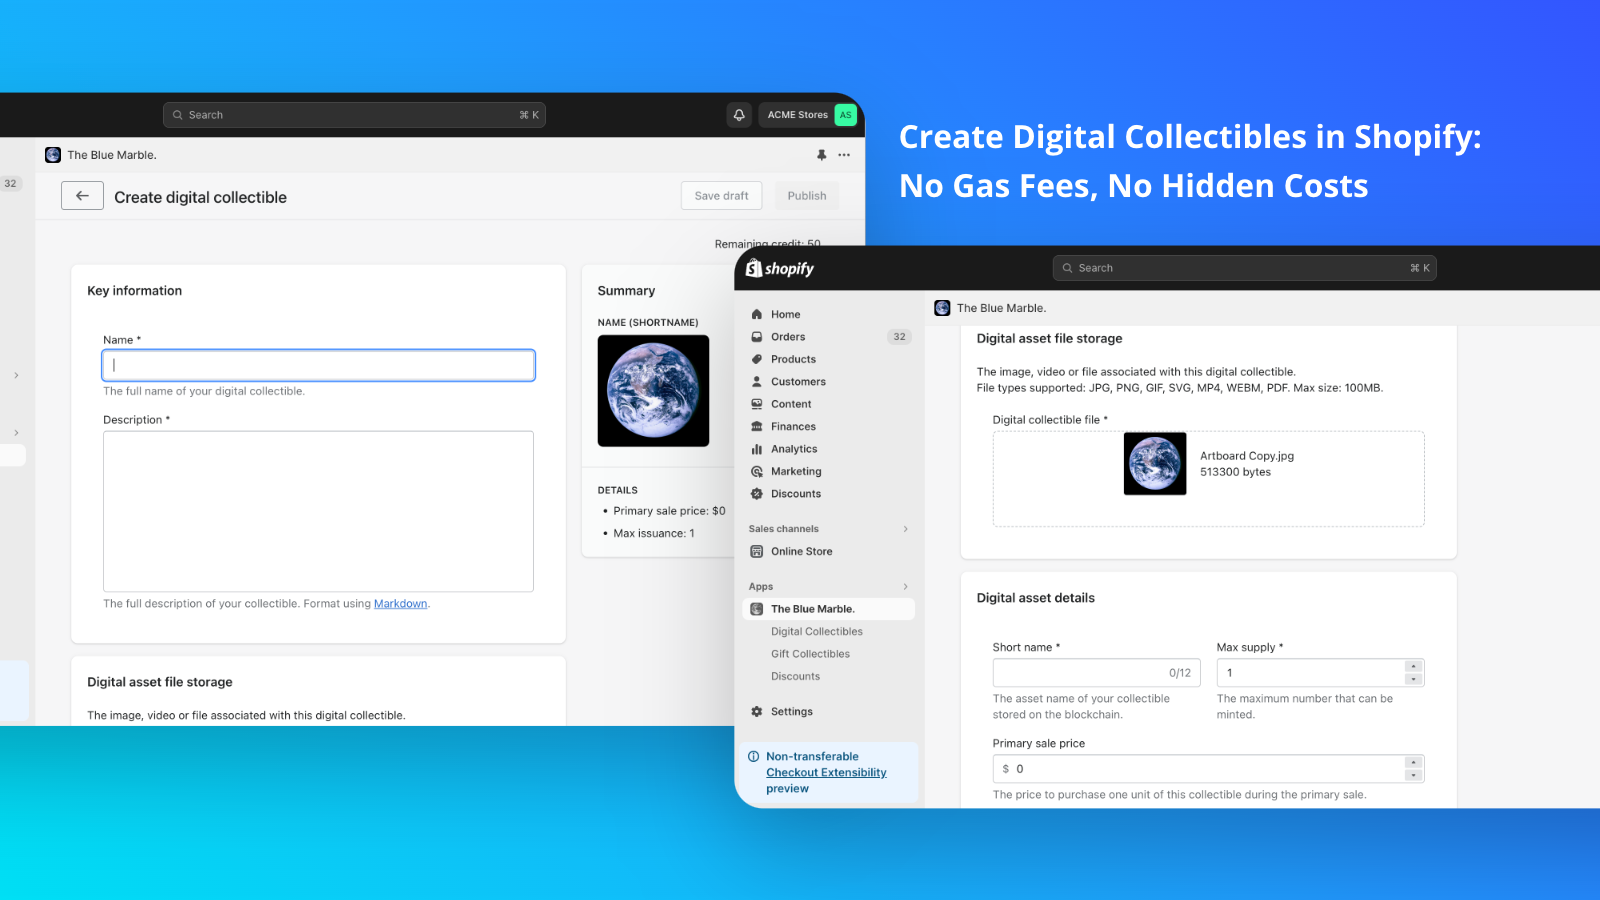 Create Digital Collectibles in Shopify: No Gas Fees